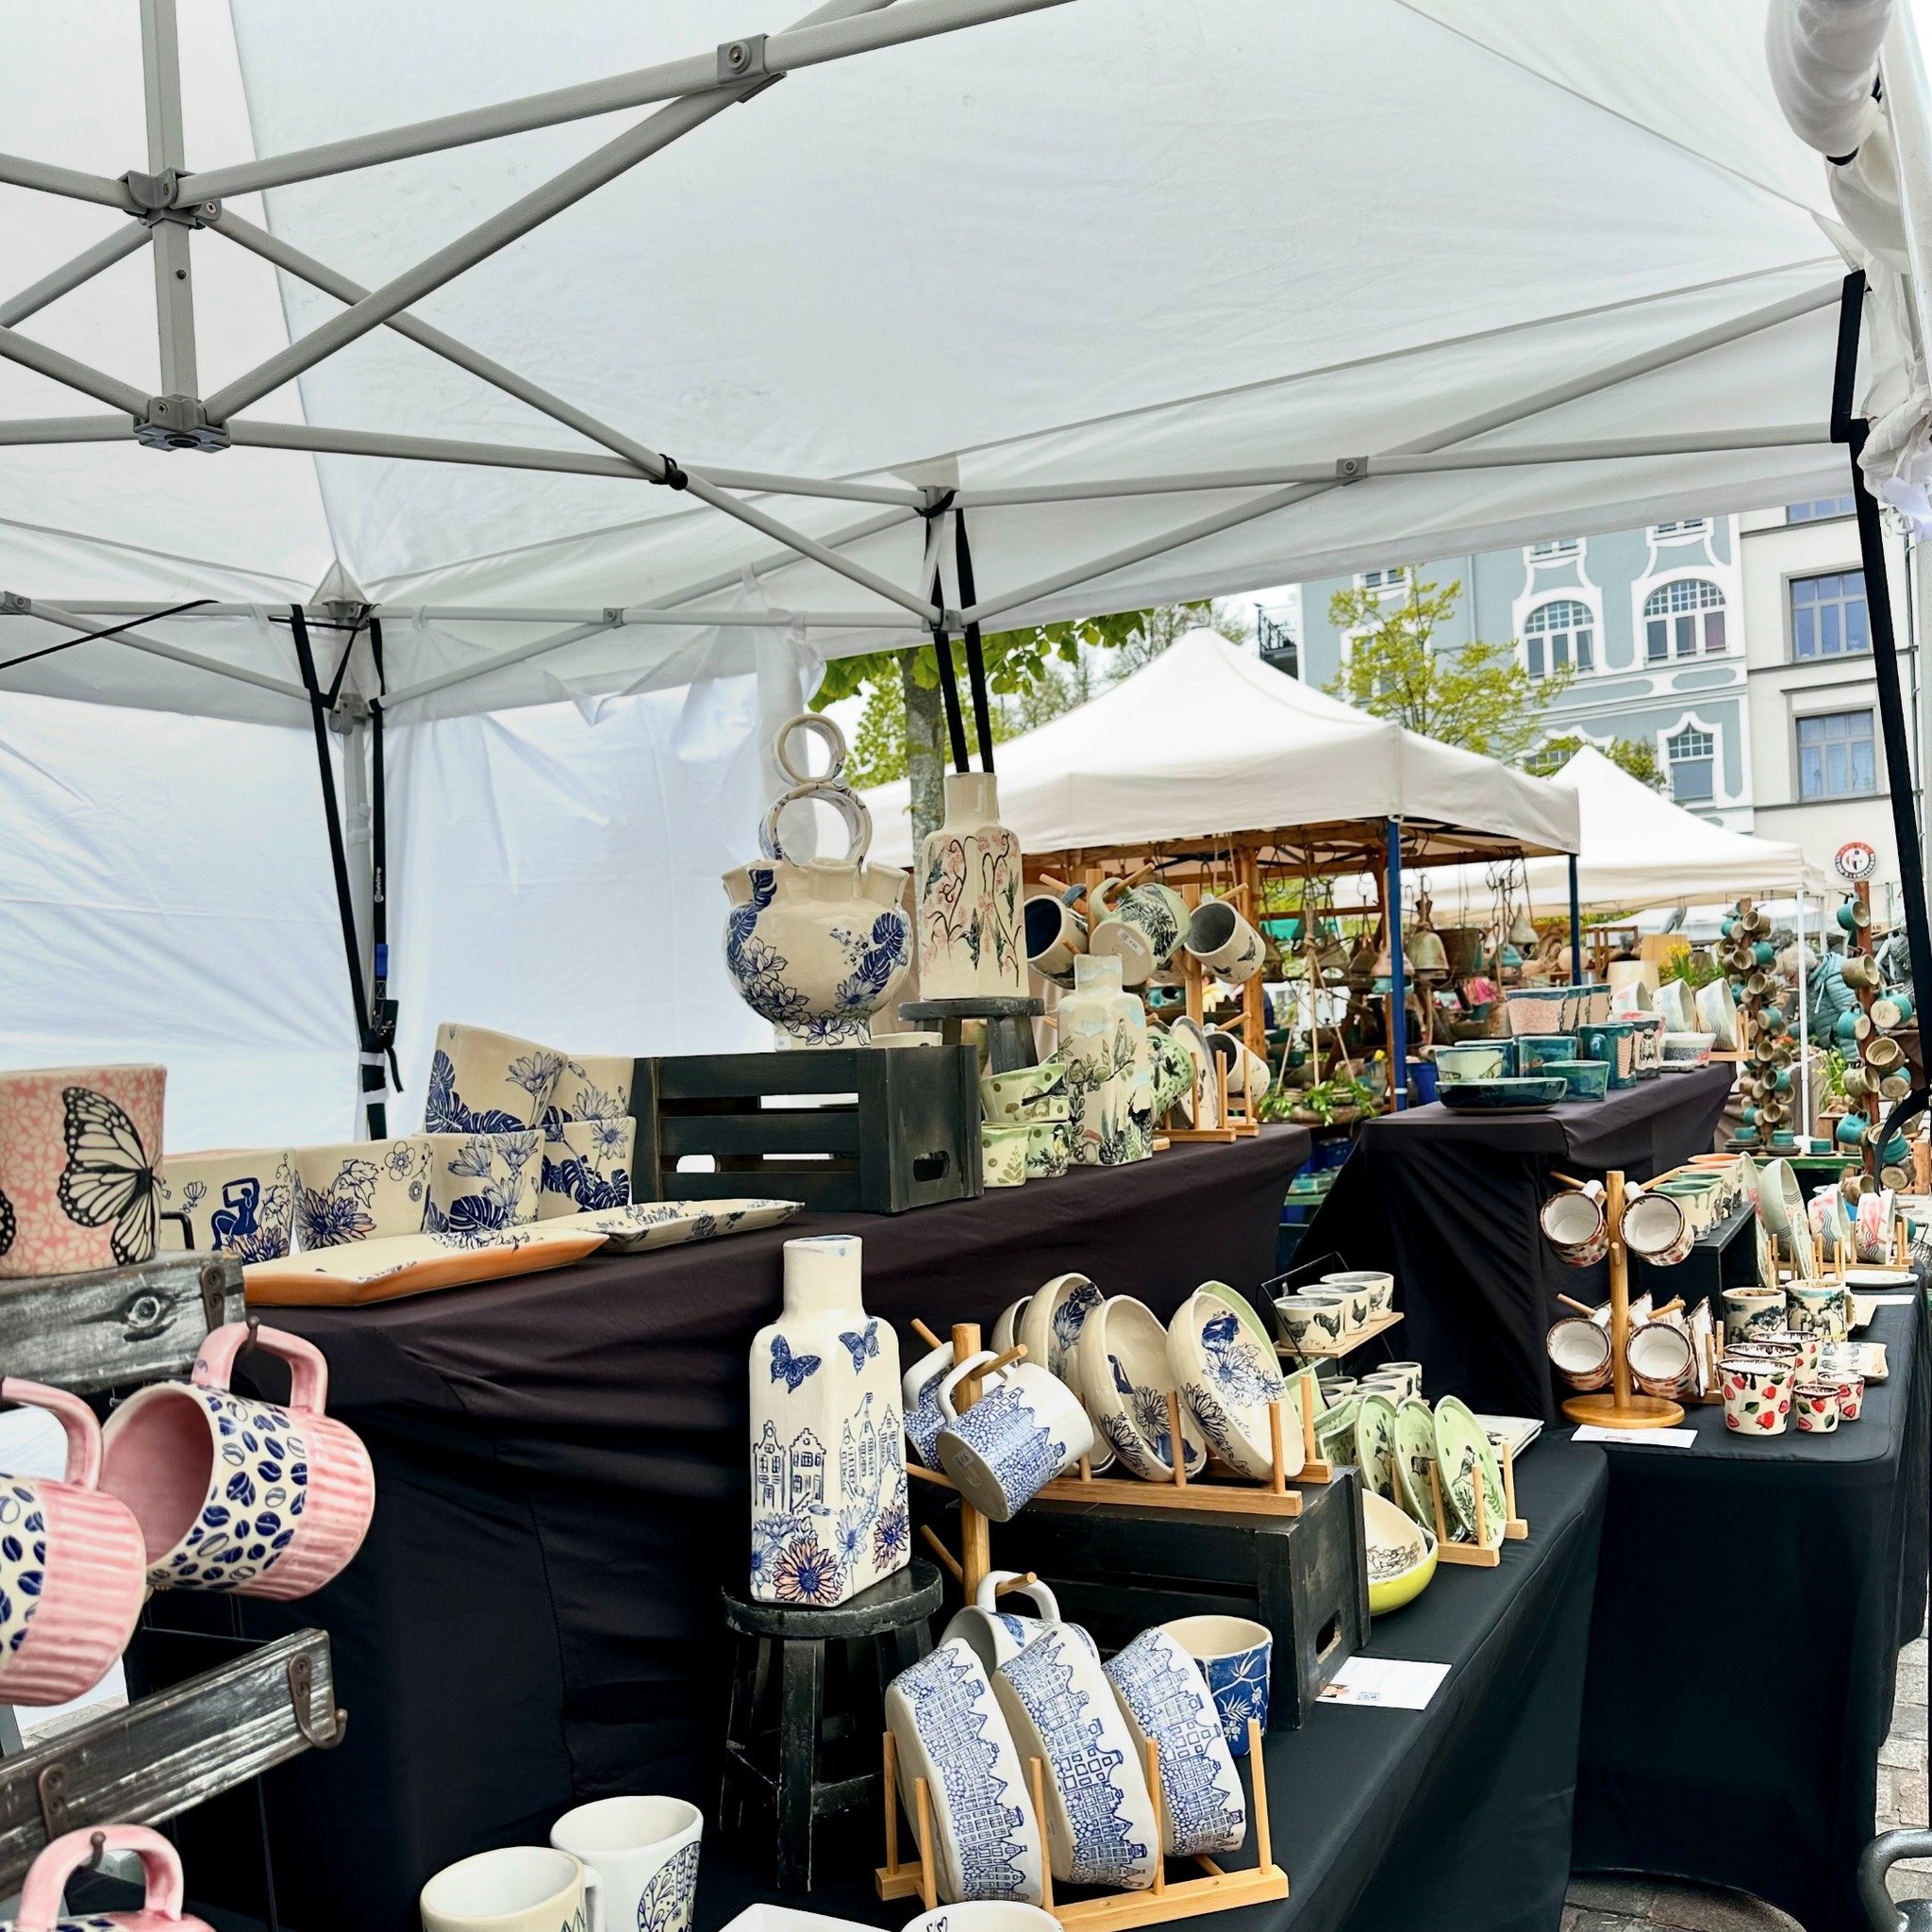 Marketday in Warnem&uuml;nde. Light drizzle, temps on the colder side, but who cares. It&rsquo;s great to be out there. Catch me today or tomorrow on Kirchenplatz. 

#potteryadventures #warnemunde #t&ouml;pfern #keramikliebe #tasse #kaffee #dutchdesi